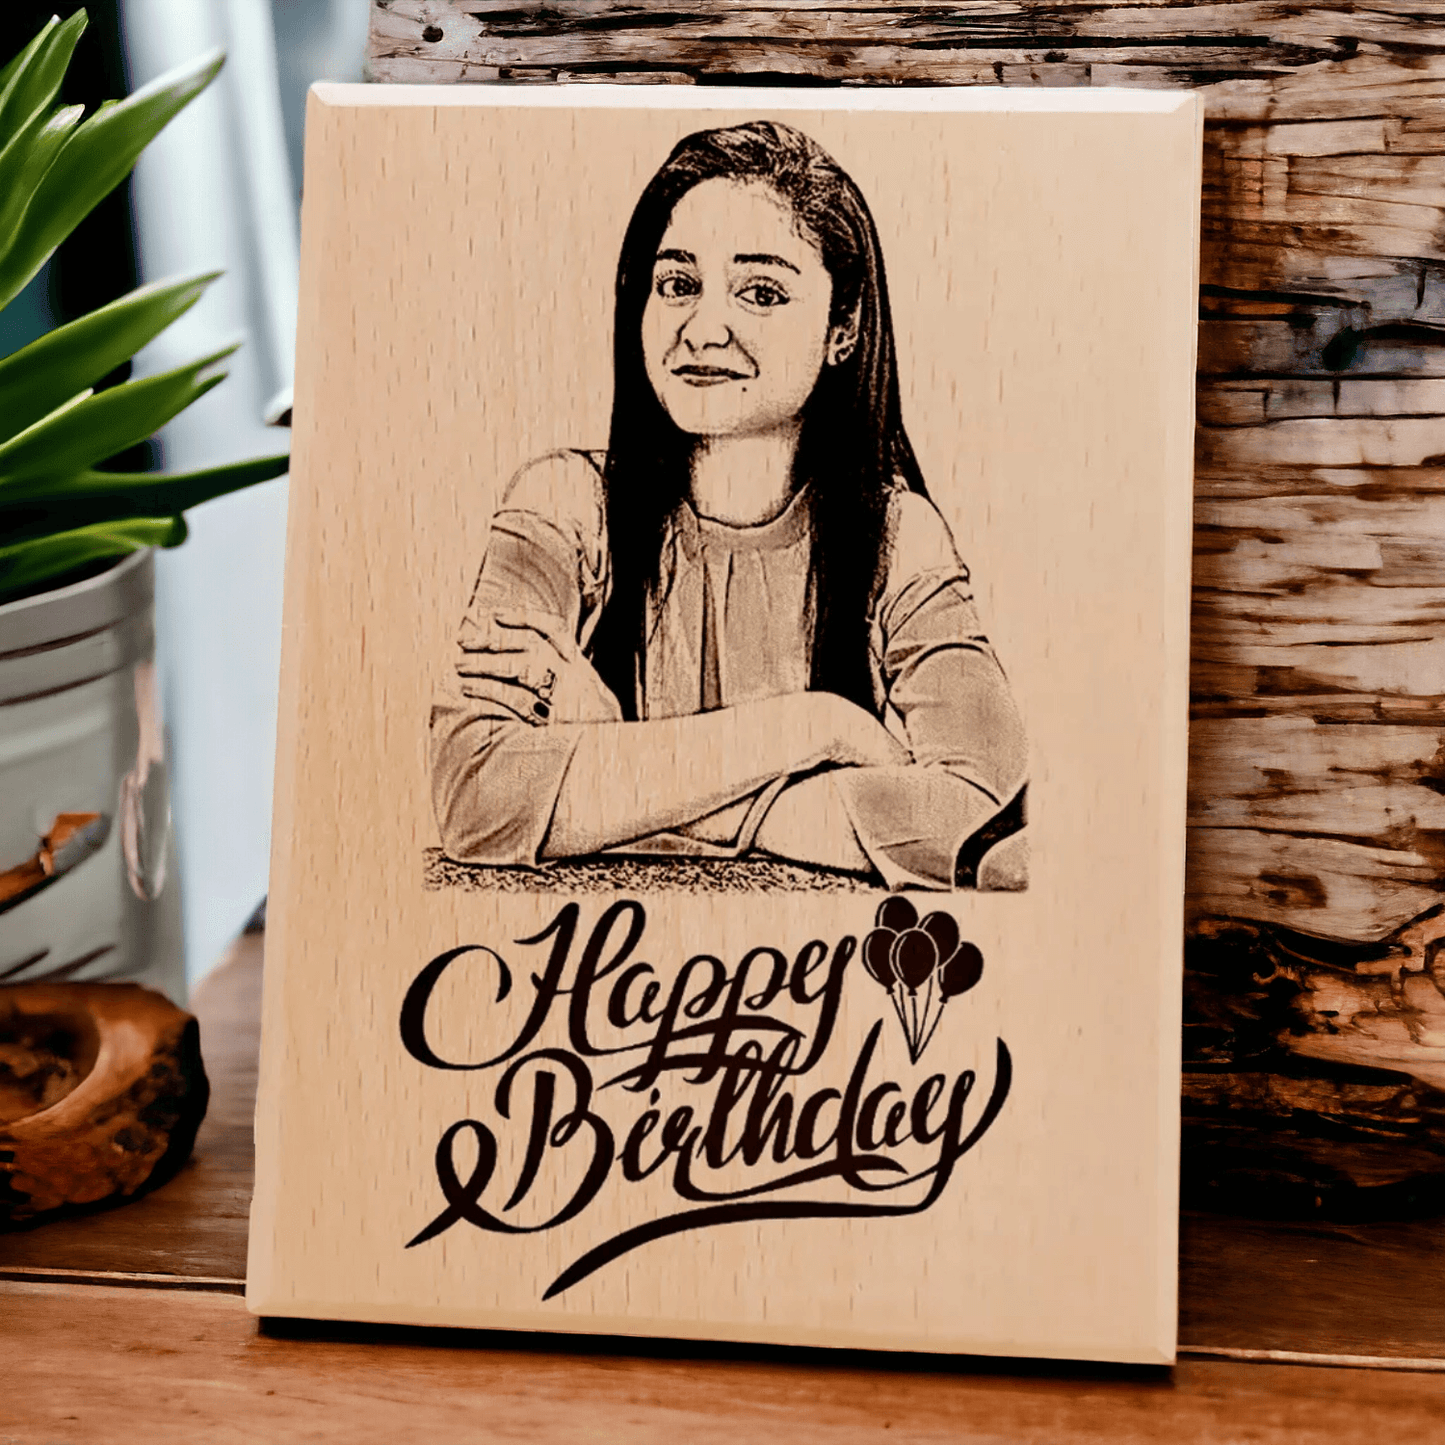 Personalized Wooden Birthday Gift for Girlfriend